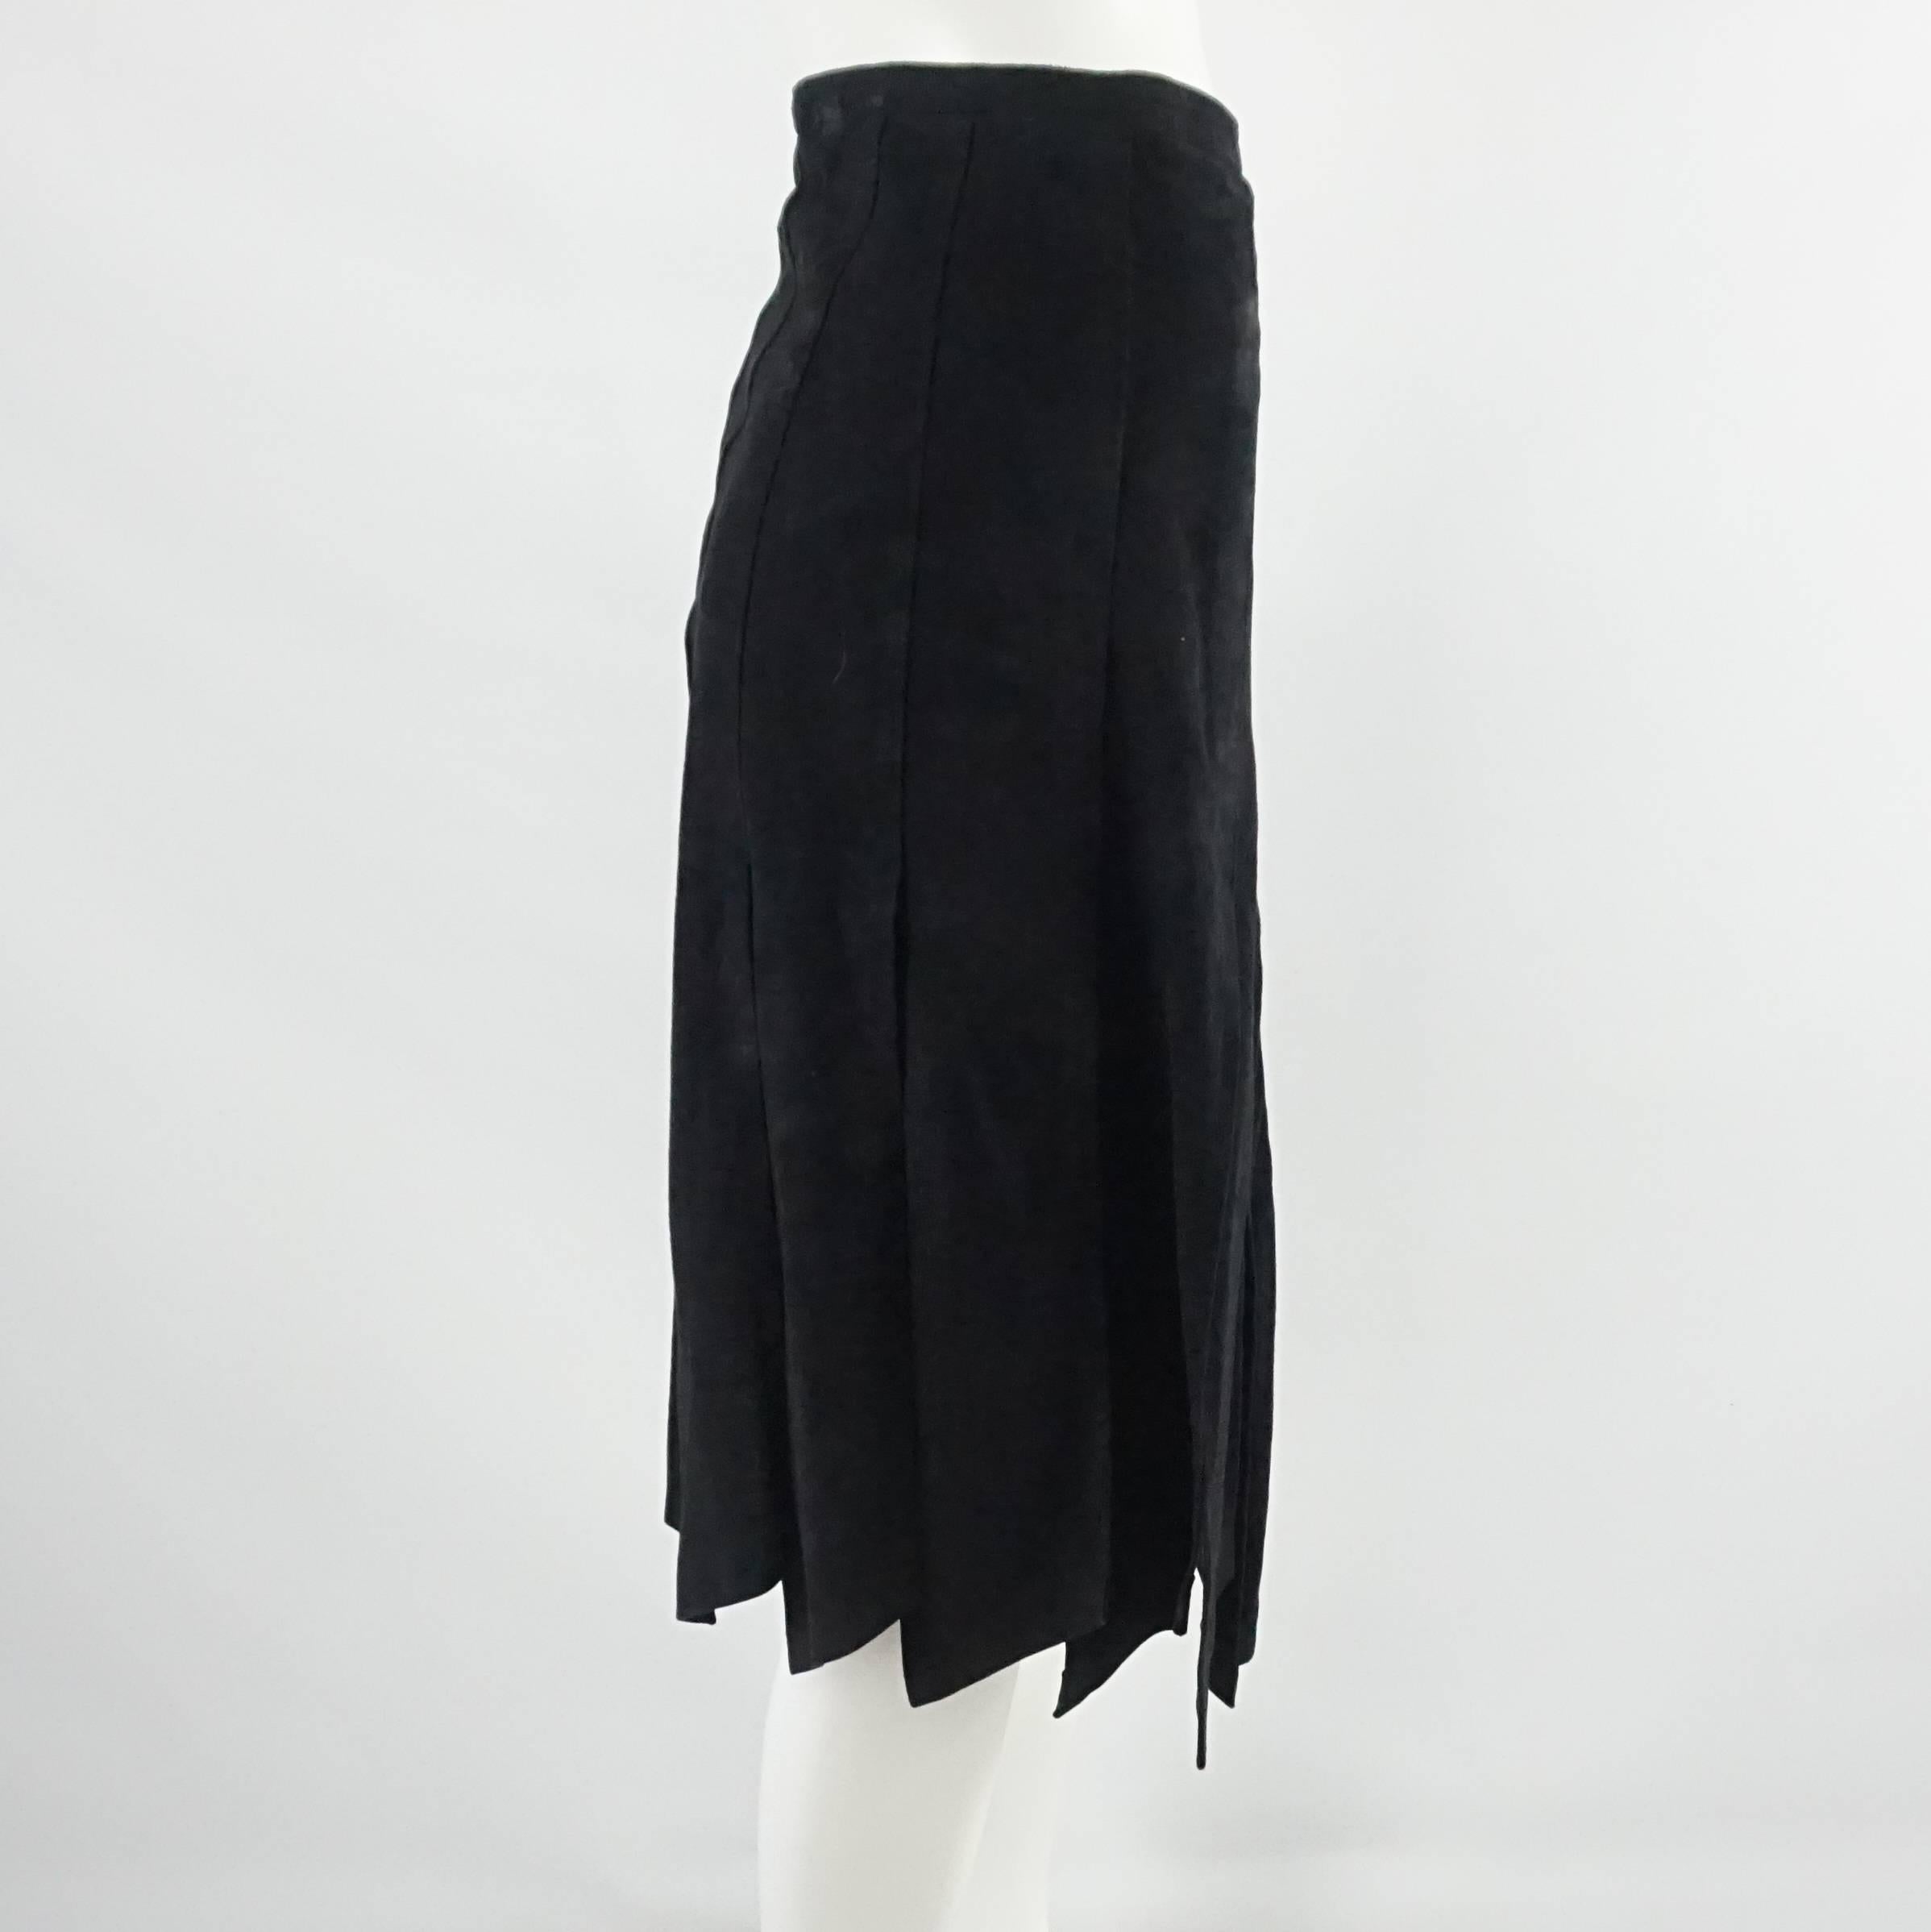 This vintage black suede car wash pleat skirt is a striking piece. It has slits running up to the upper thigh and a back zipper. The piece is in fair vintage condition with some general wear to the fabric. Size M, circa 1990's.